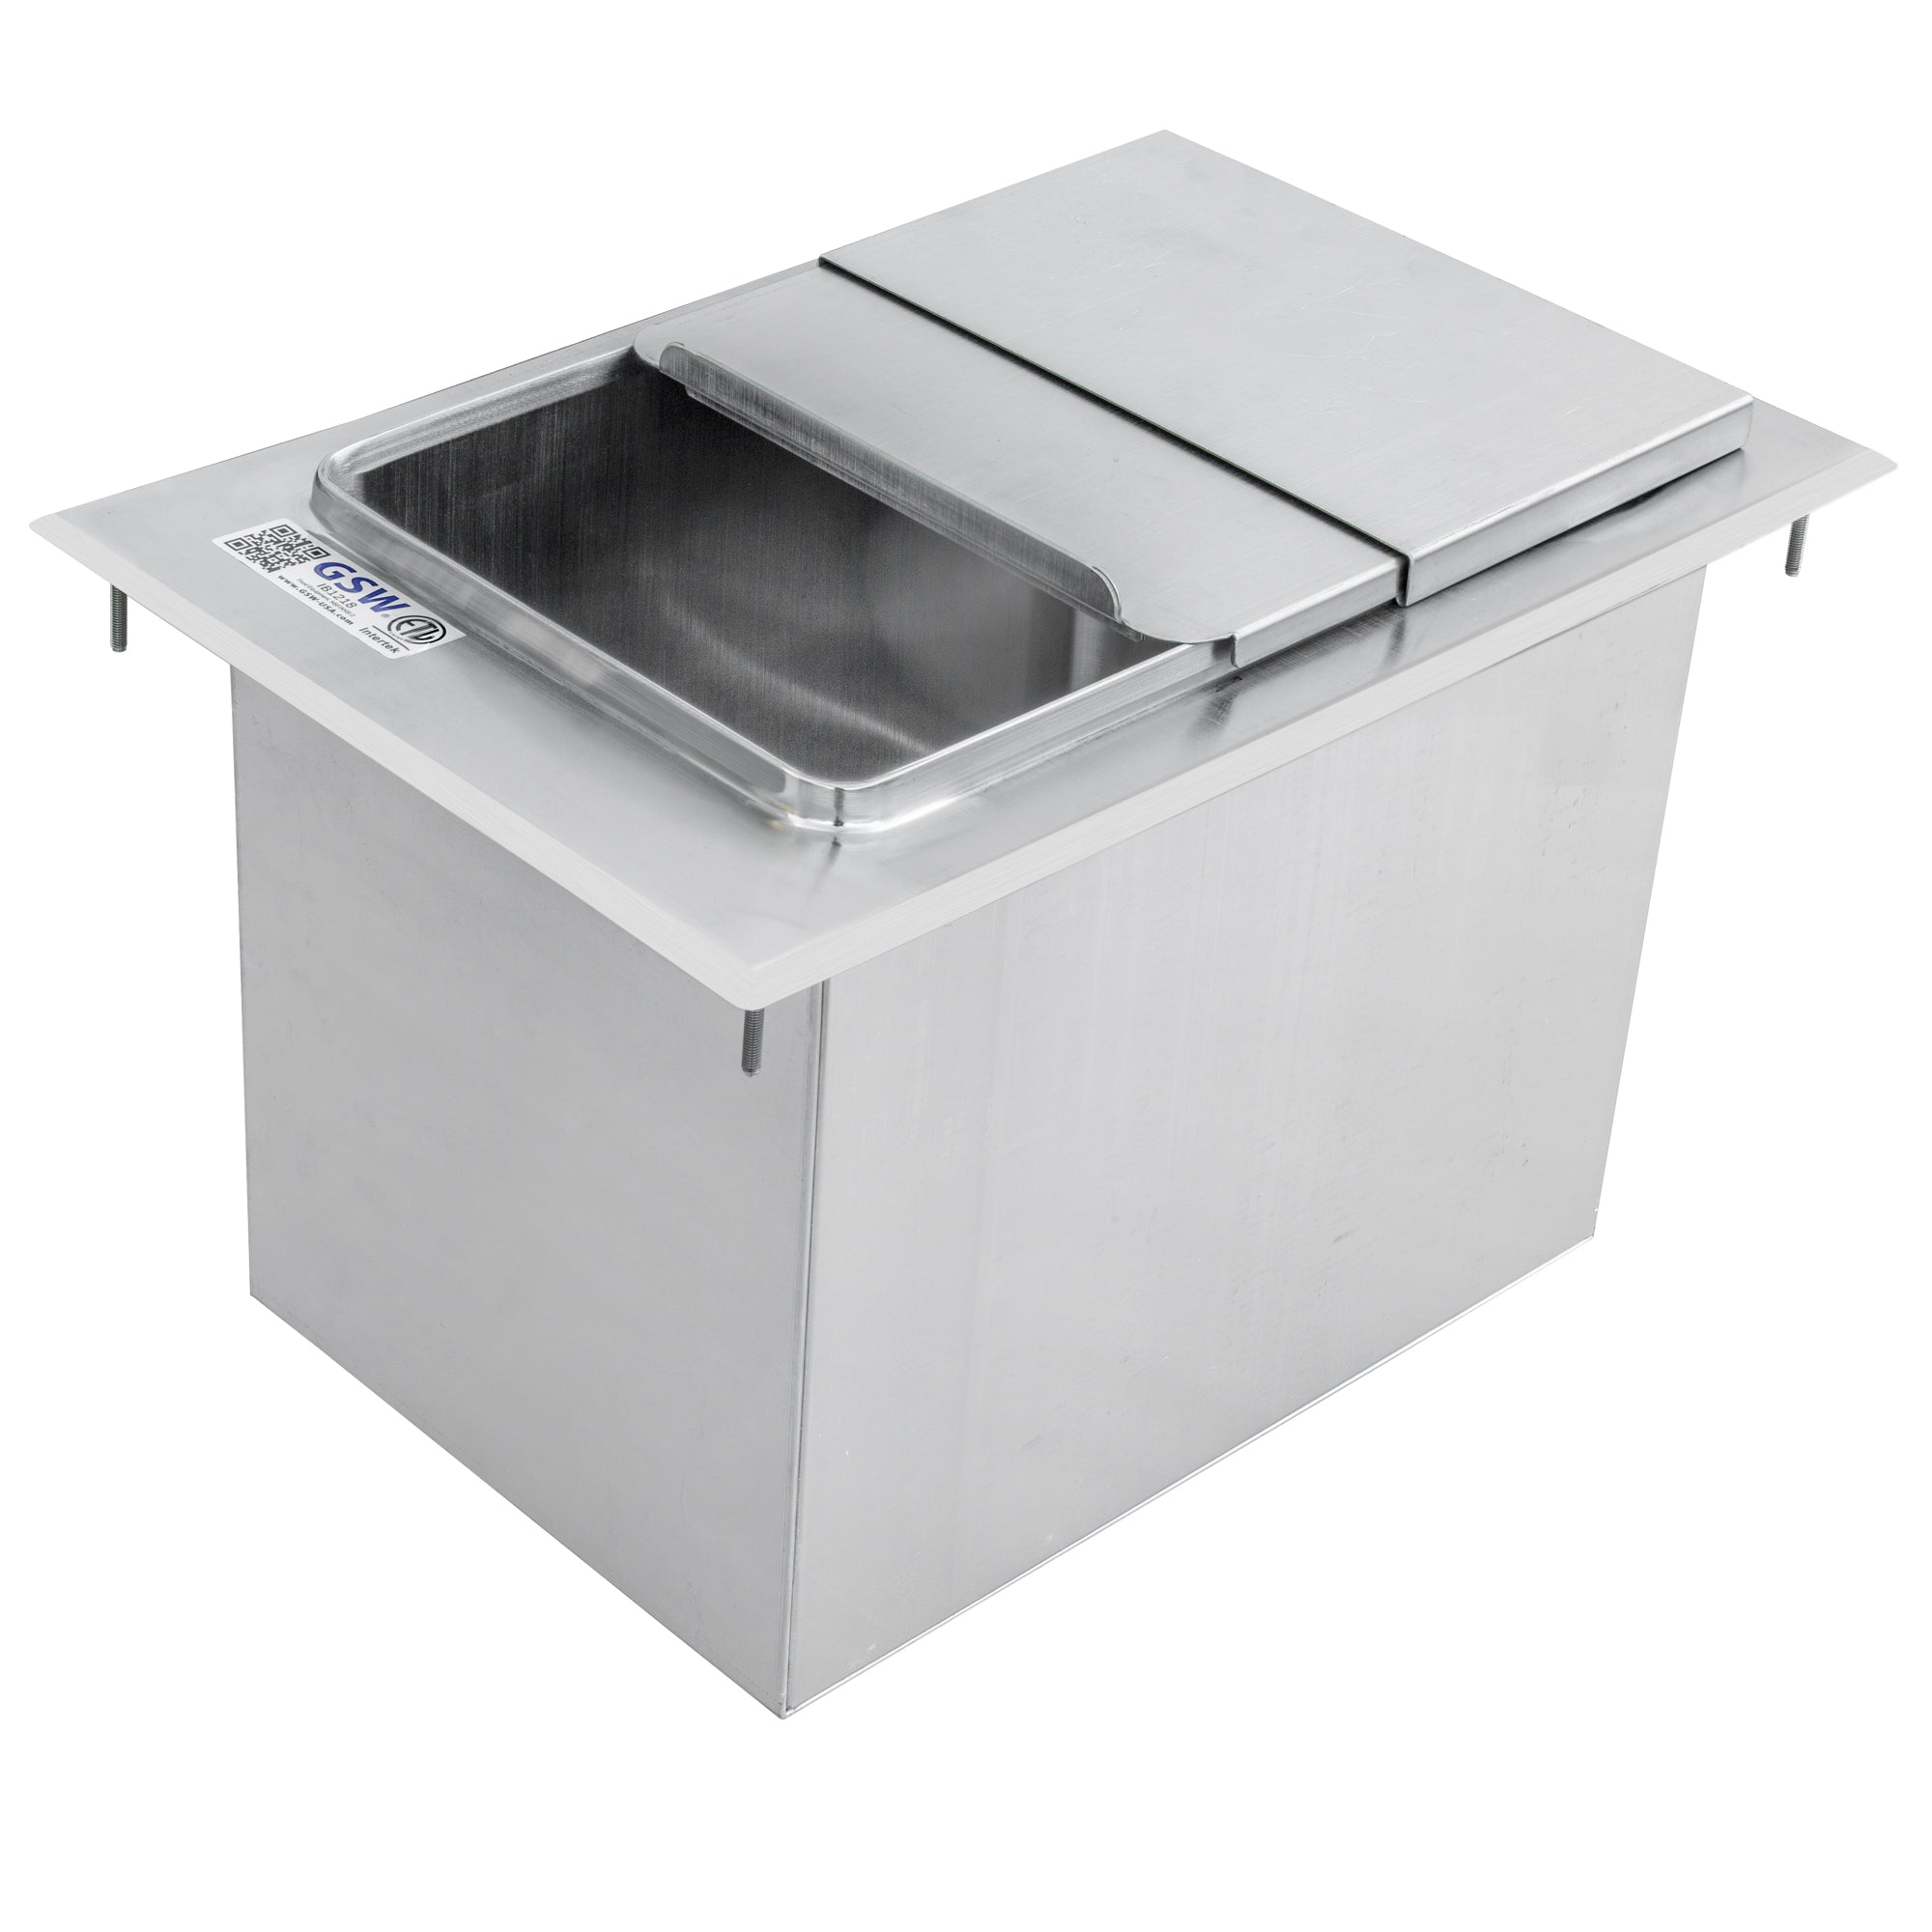 GSW IB1218 Stainless Steel Drop-In Ice Bin 18”D x 12”W x 14”H with Removable Sliding Cover, 9” x 14” Double Walled Ice Bin with 1” NPT Drain, for Storing Ice Cold Wine Beer